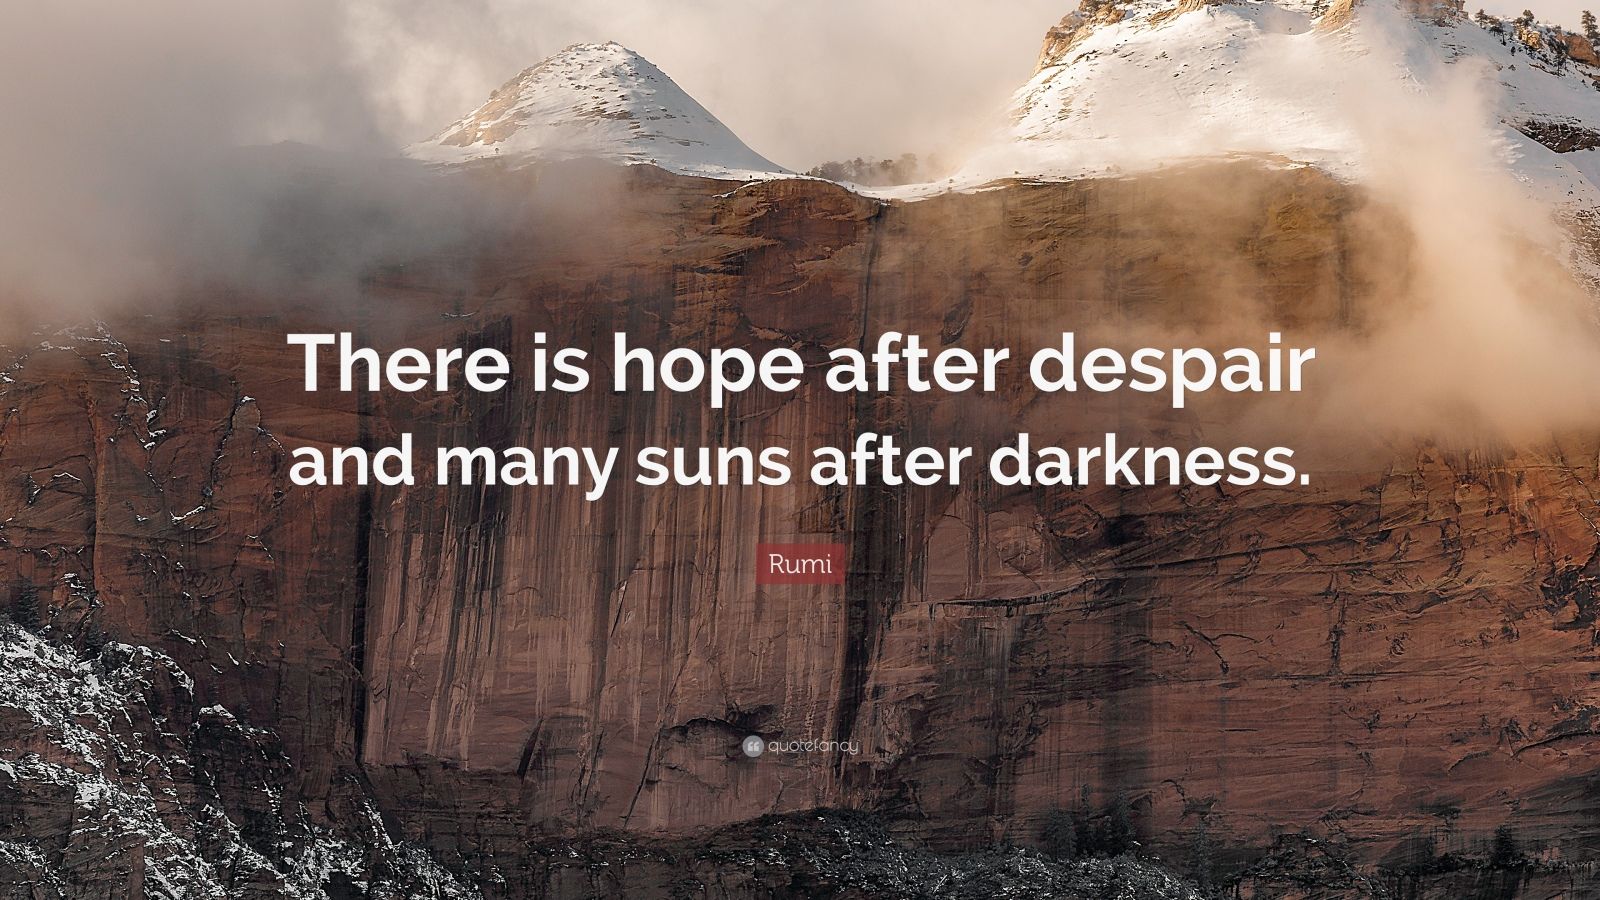 Rumi Quote: “There is hope after despair and many suns after darkness